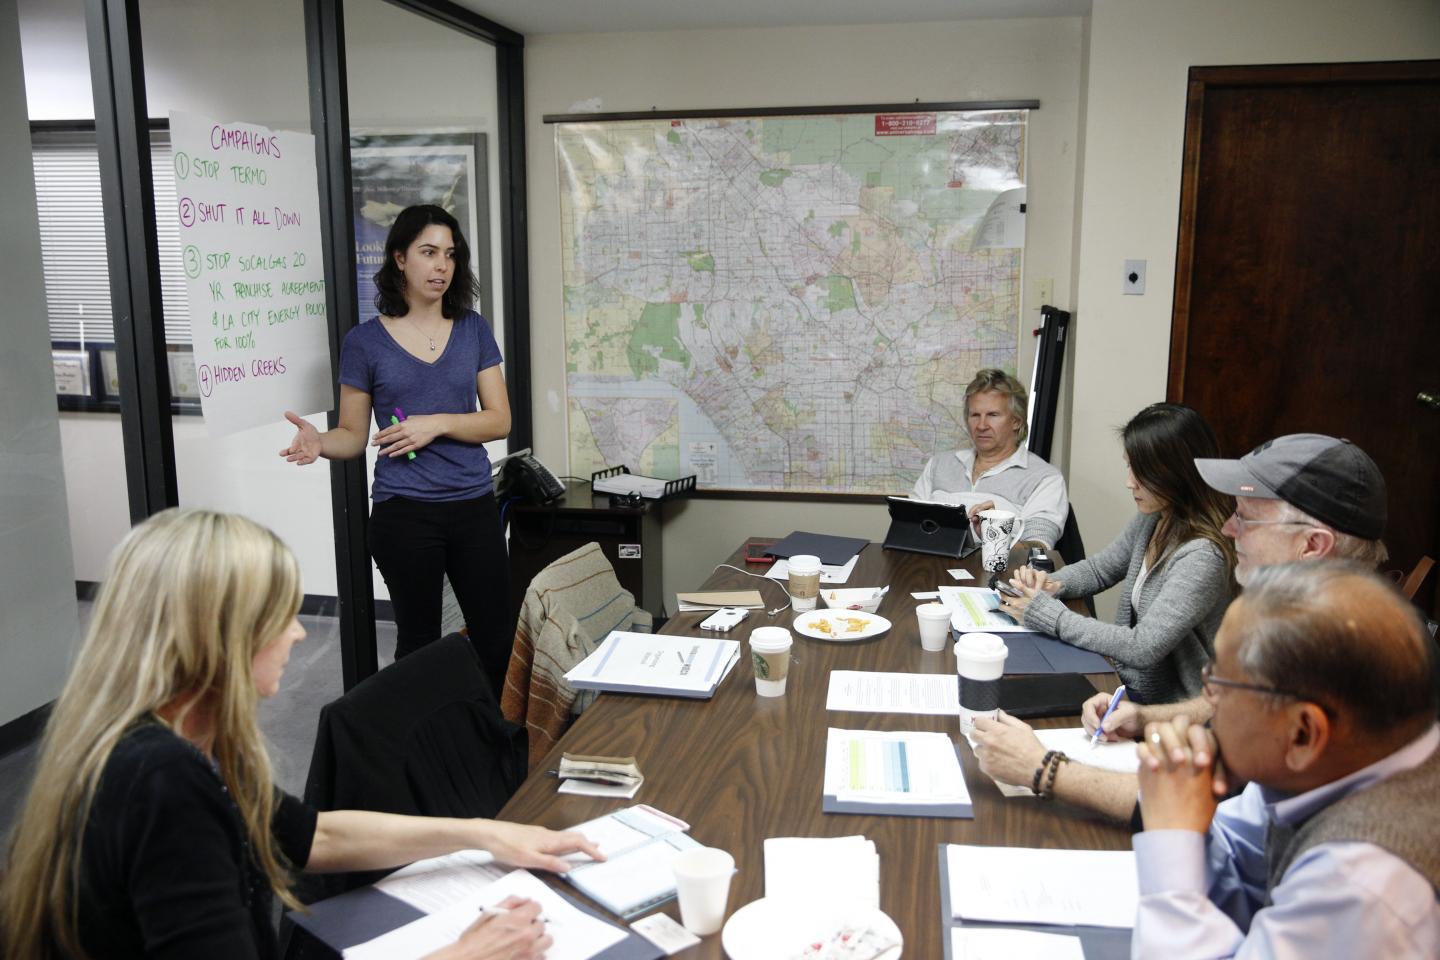 Alexandra Nagy, an organizer with Food & Water Watch, speaks about a plan to "Shut It All Down" as residents including Matt Pakucko, president and co-founder of Save Porter Ranch, center right, and Kyoko Hibino, rear right, look on, during a board meeting for the group on Jan. 3.